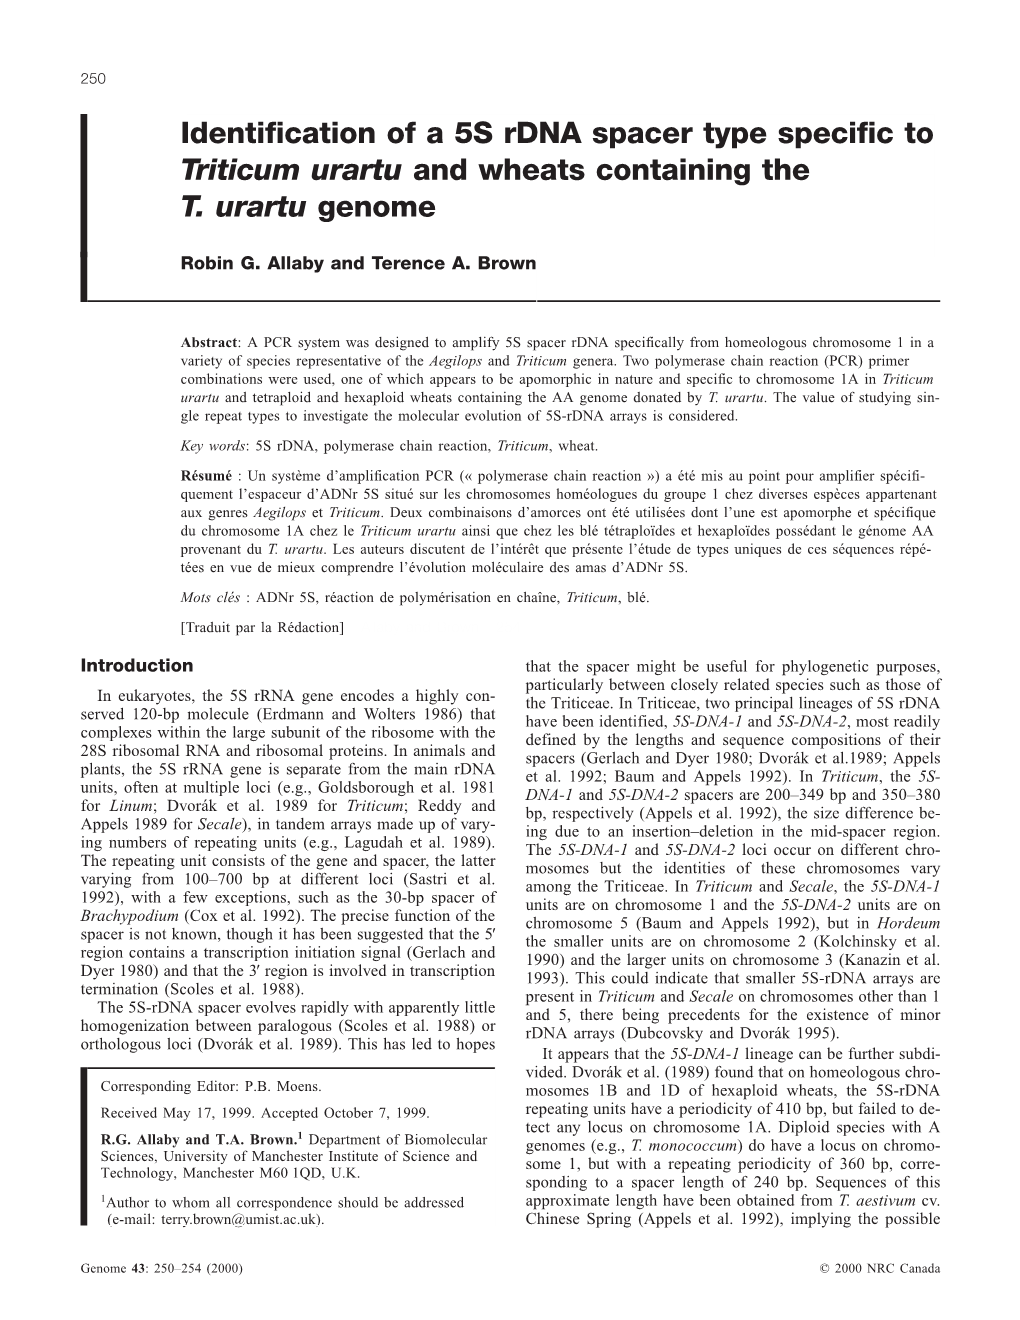 Identification of a 5S Rdna Spacer Type Specific to Triticum Urartu and Wheats Containing the T